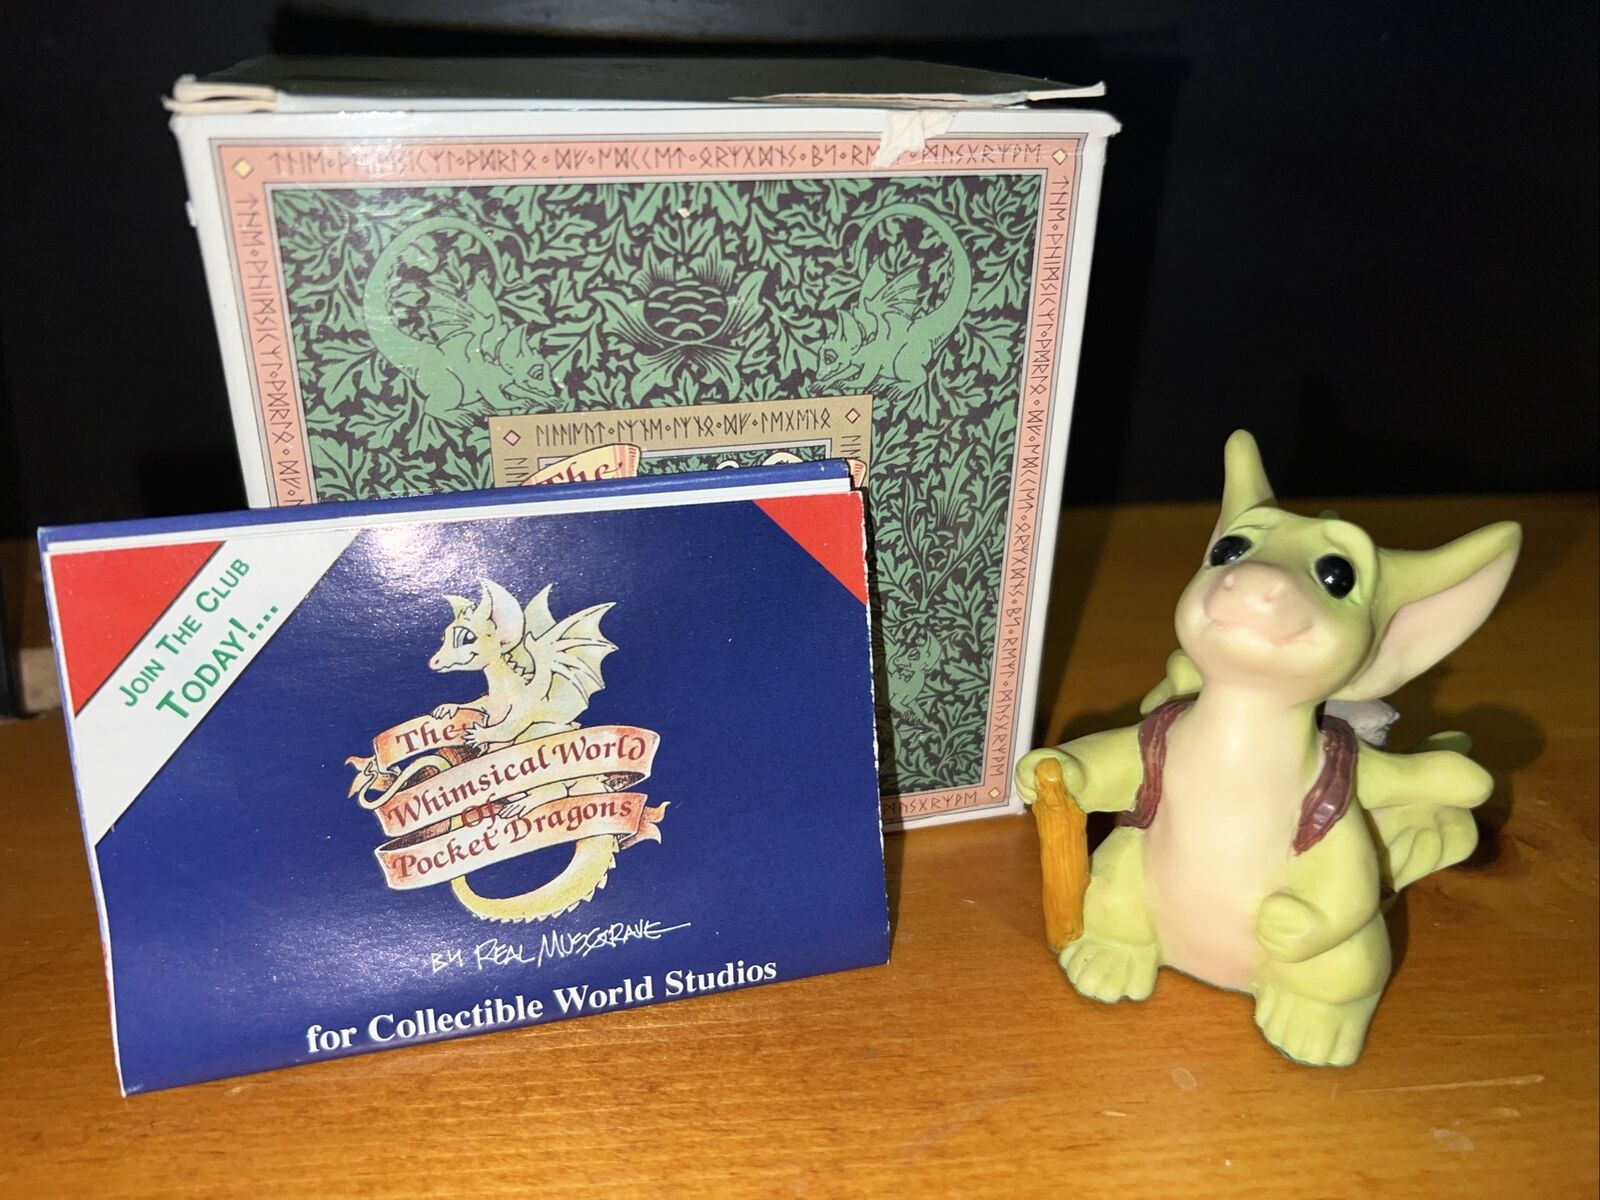 1996 Whimsical World Pocket Dragons Real Musgrave SIGNED ‘On The Road Again’ Box